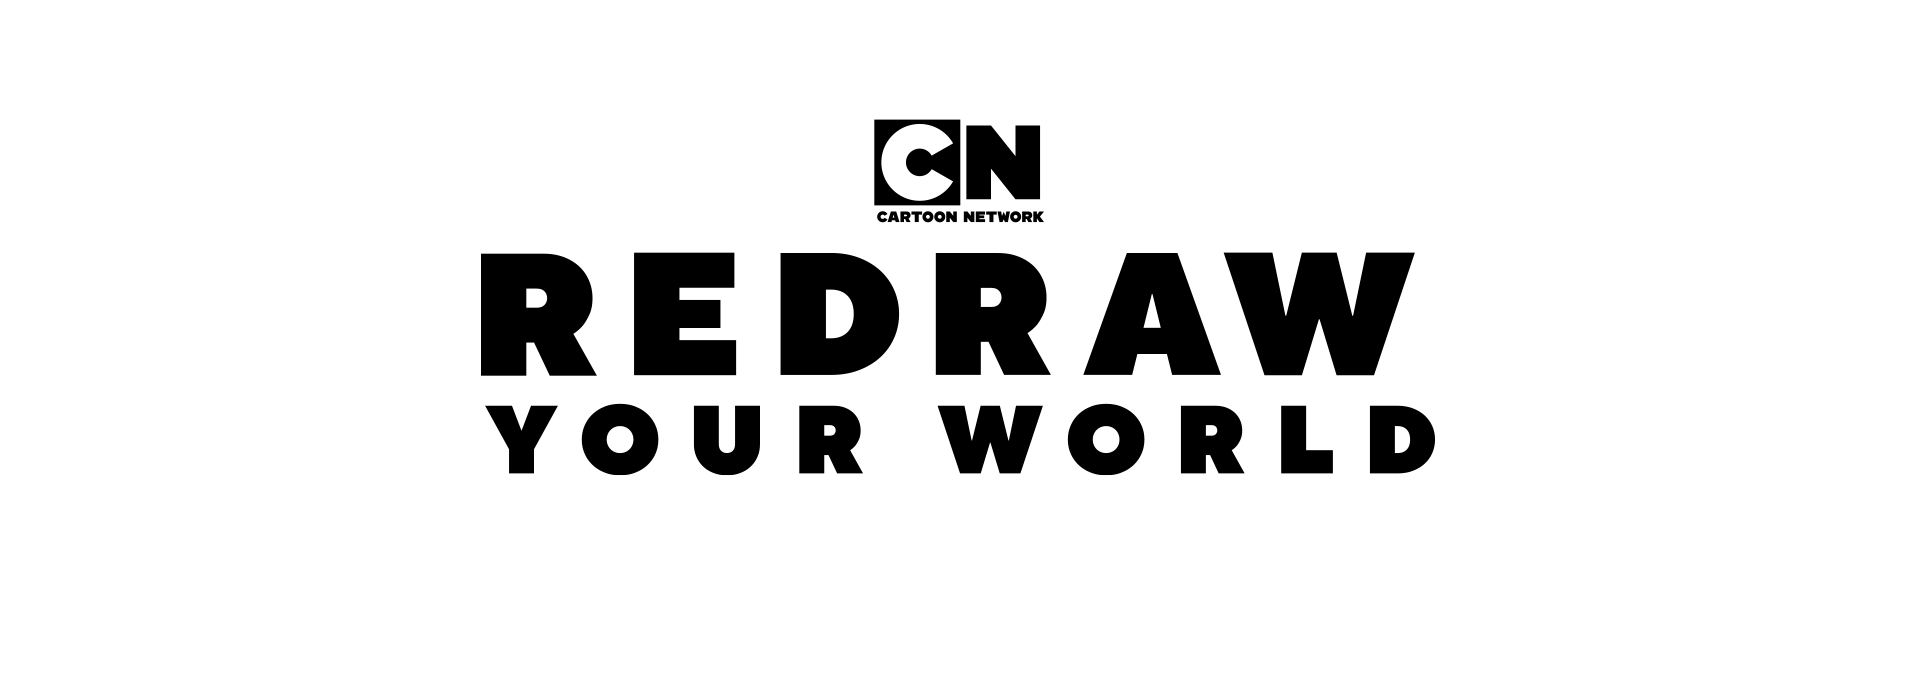 Redraw Your World | Free Games, Videos and Downloads | Cartoon Network